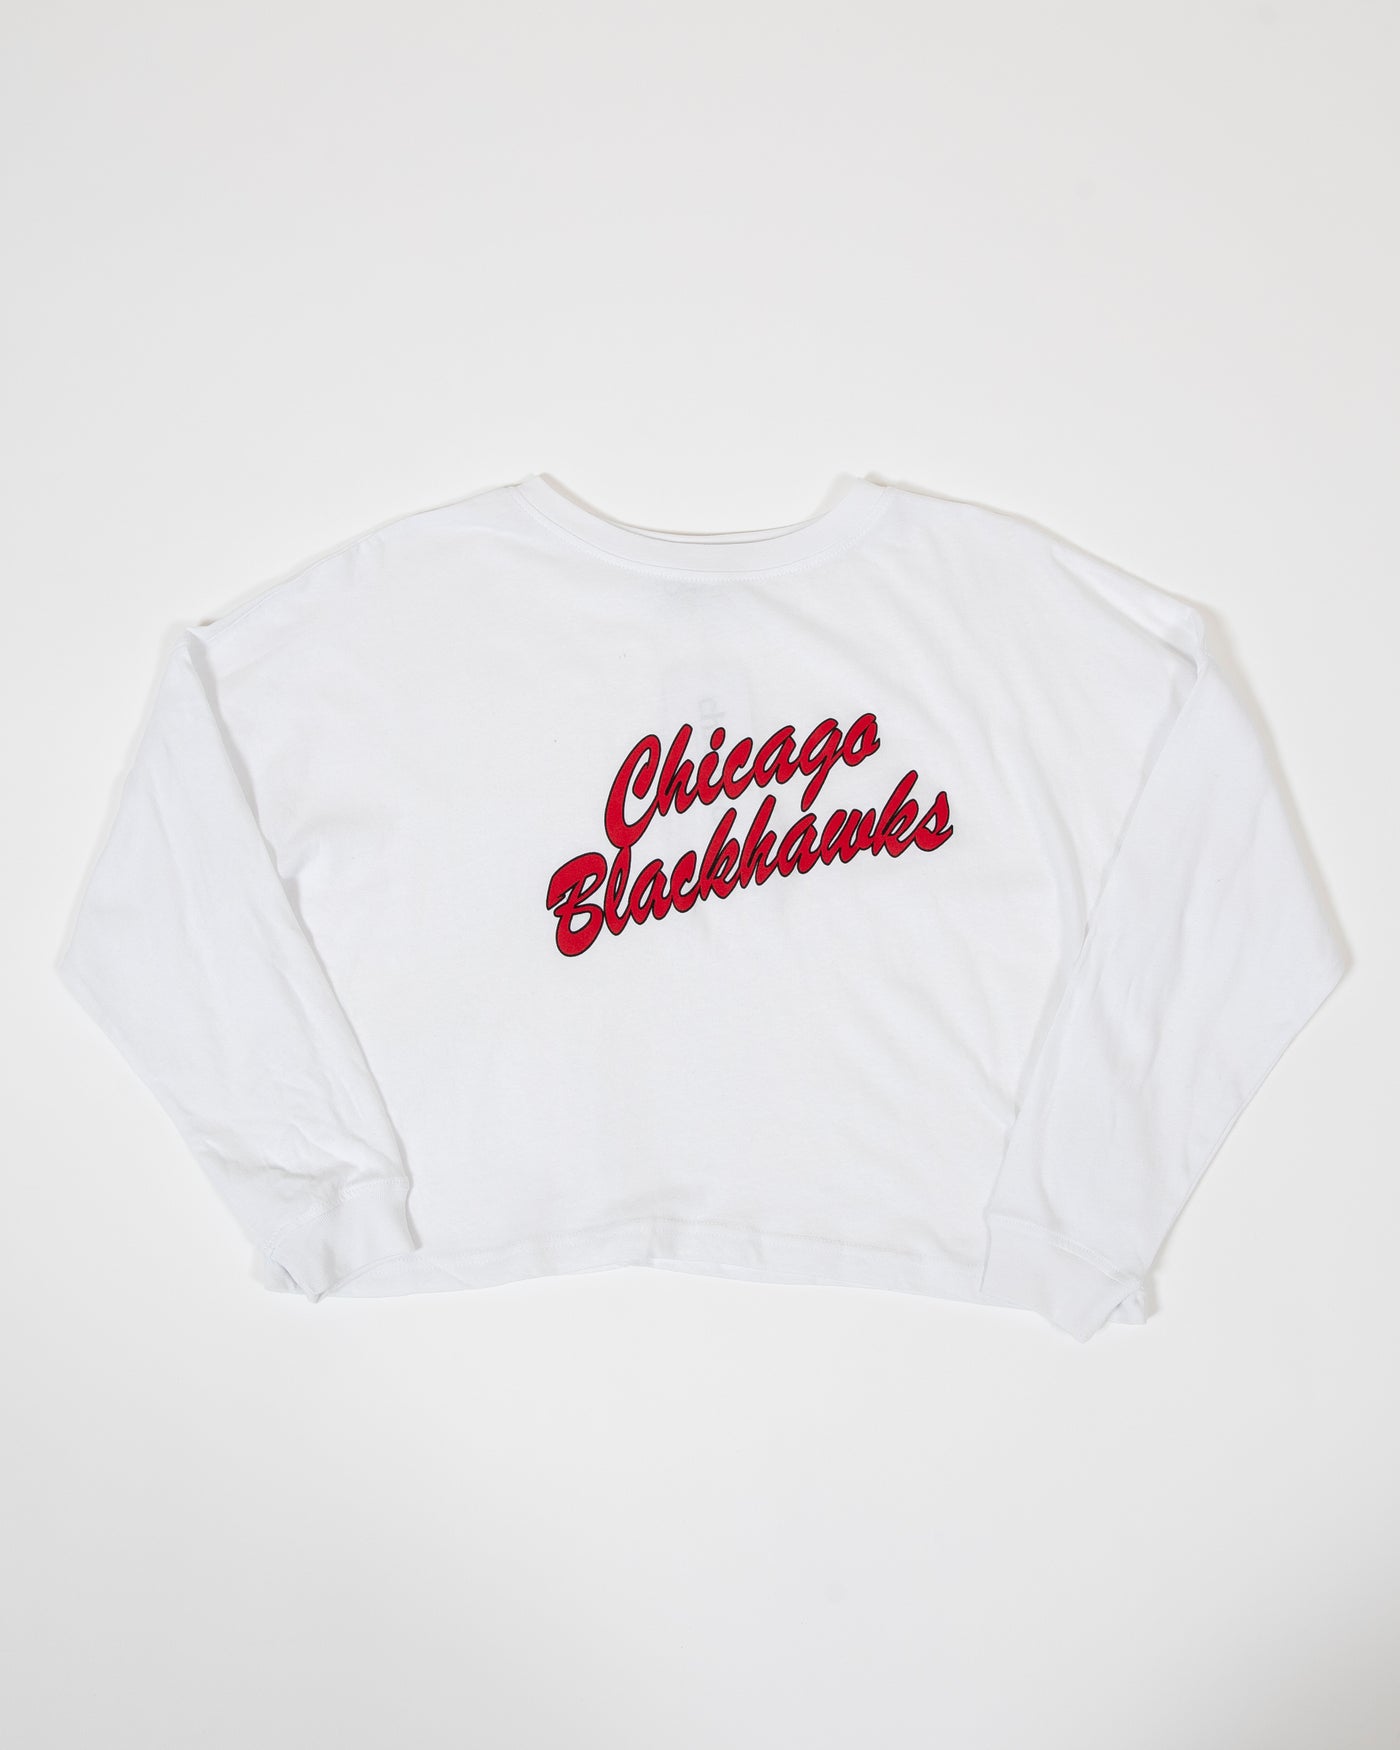 chicka-d white Chicago Blackhawks long sleeve shirt with script wordmark graphic - lay flat